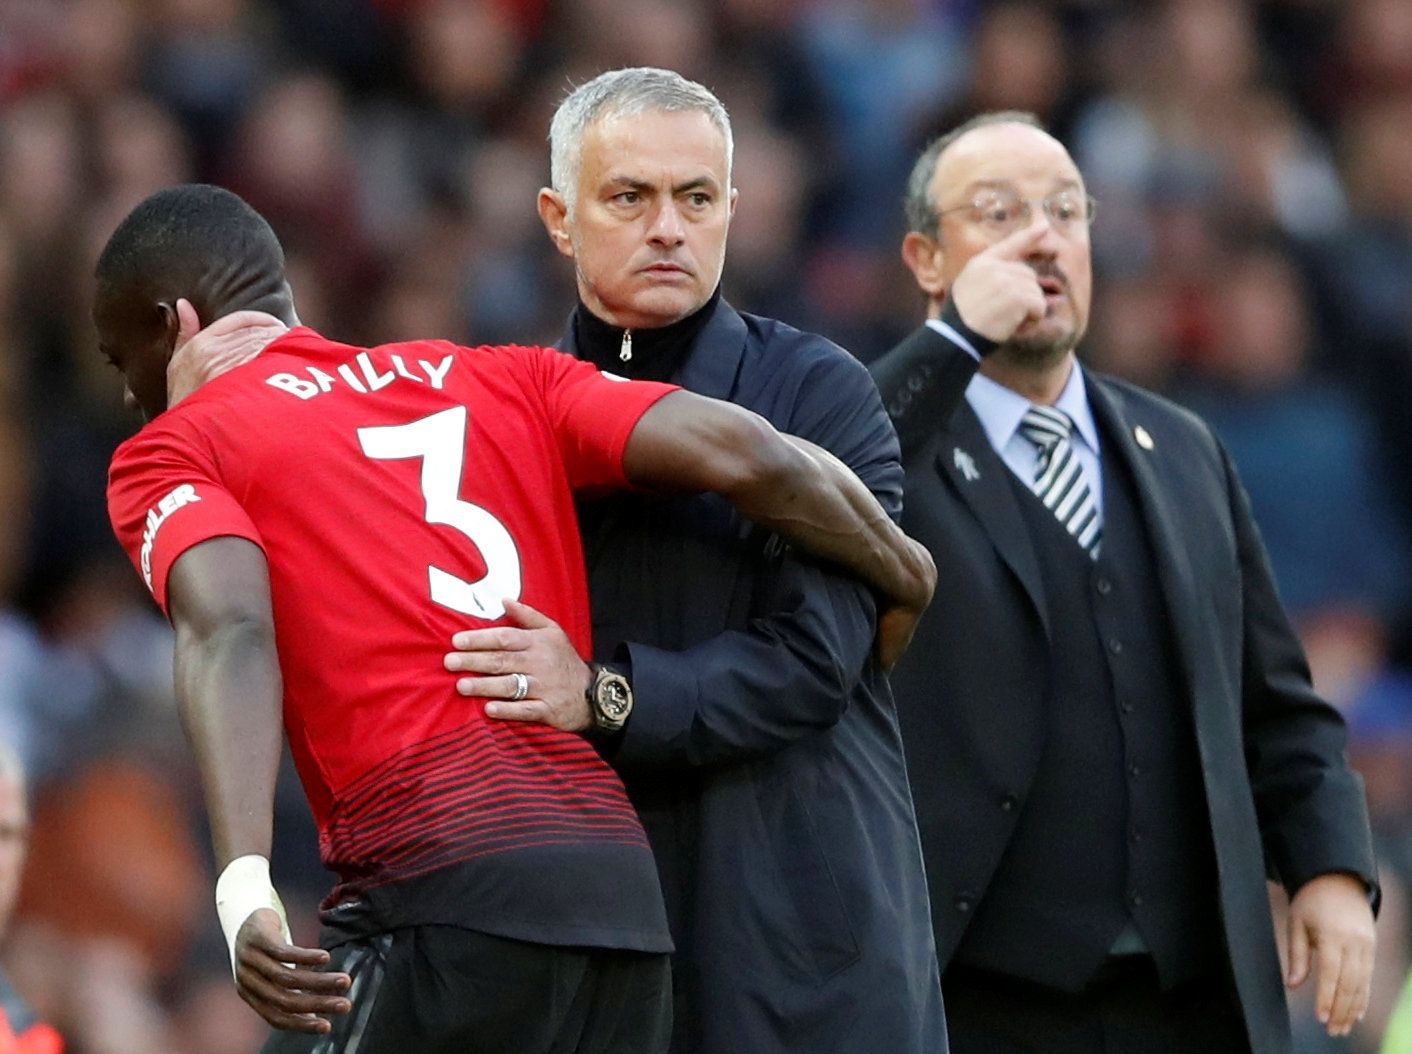 Soccer Football - Premier League - Manchester United v Newcastle United - Old Trafford, Manchester, Britain - October 6, 2018  Manchester United's Eric Bailly with manager Jose Mourinho after being substituted off  Action Images via Reuters/Carl Recine  EDITORIAL USE ONLY. No use with unauthorized audio, video, data, fixture lists, club/league logos or 